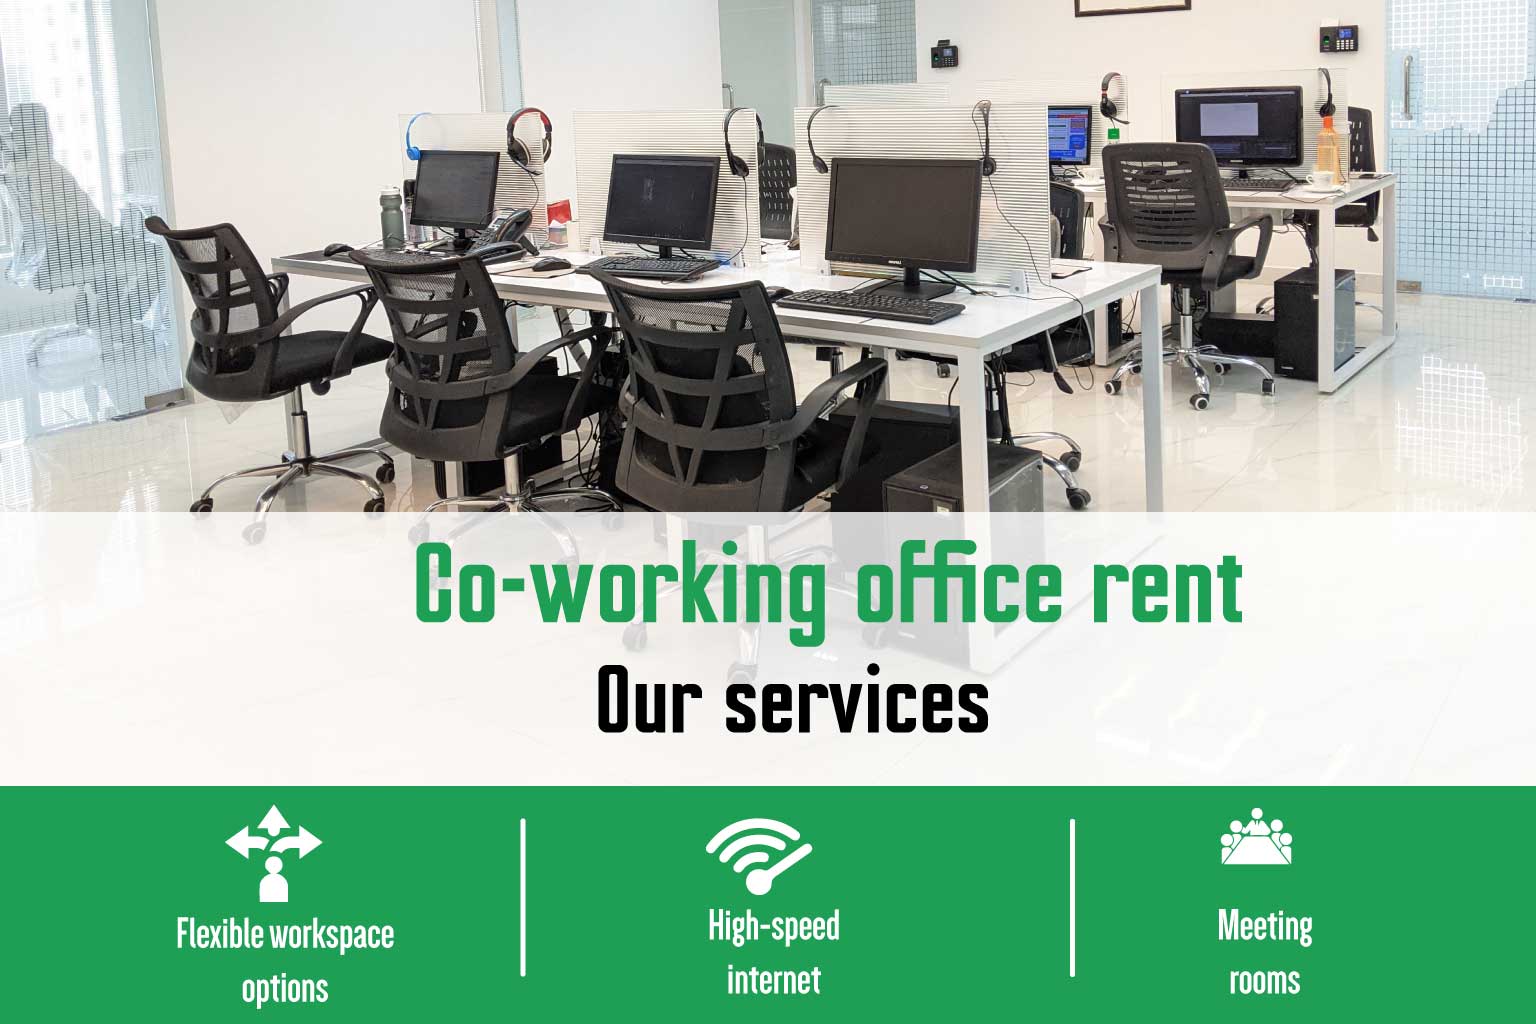 Co-Working Office Rent Our Services